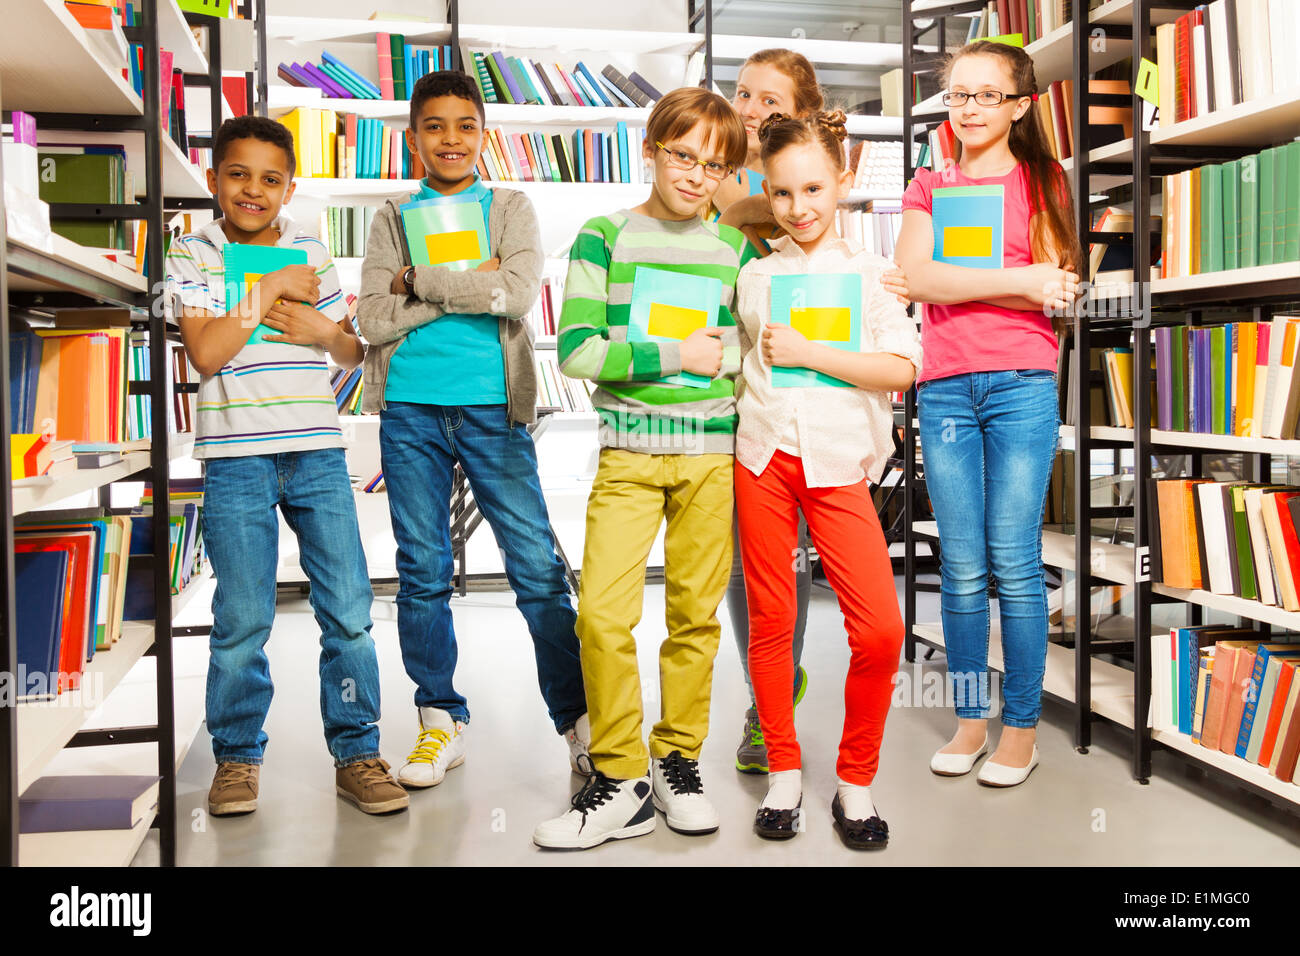 Children in library holding exercise books Stock Photo